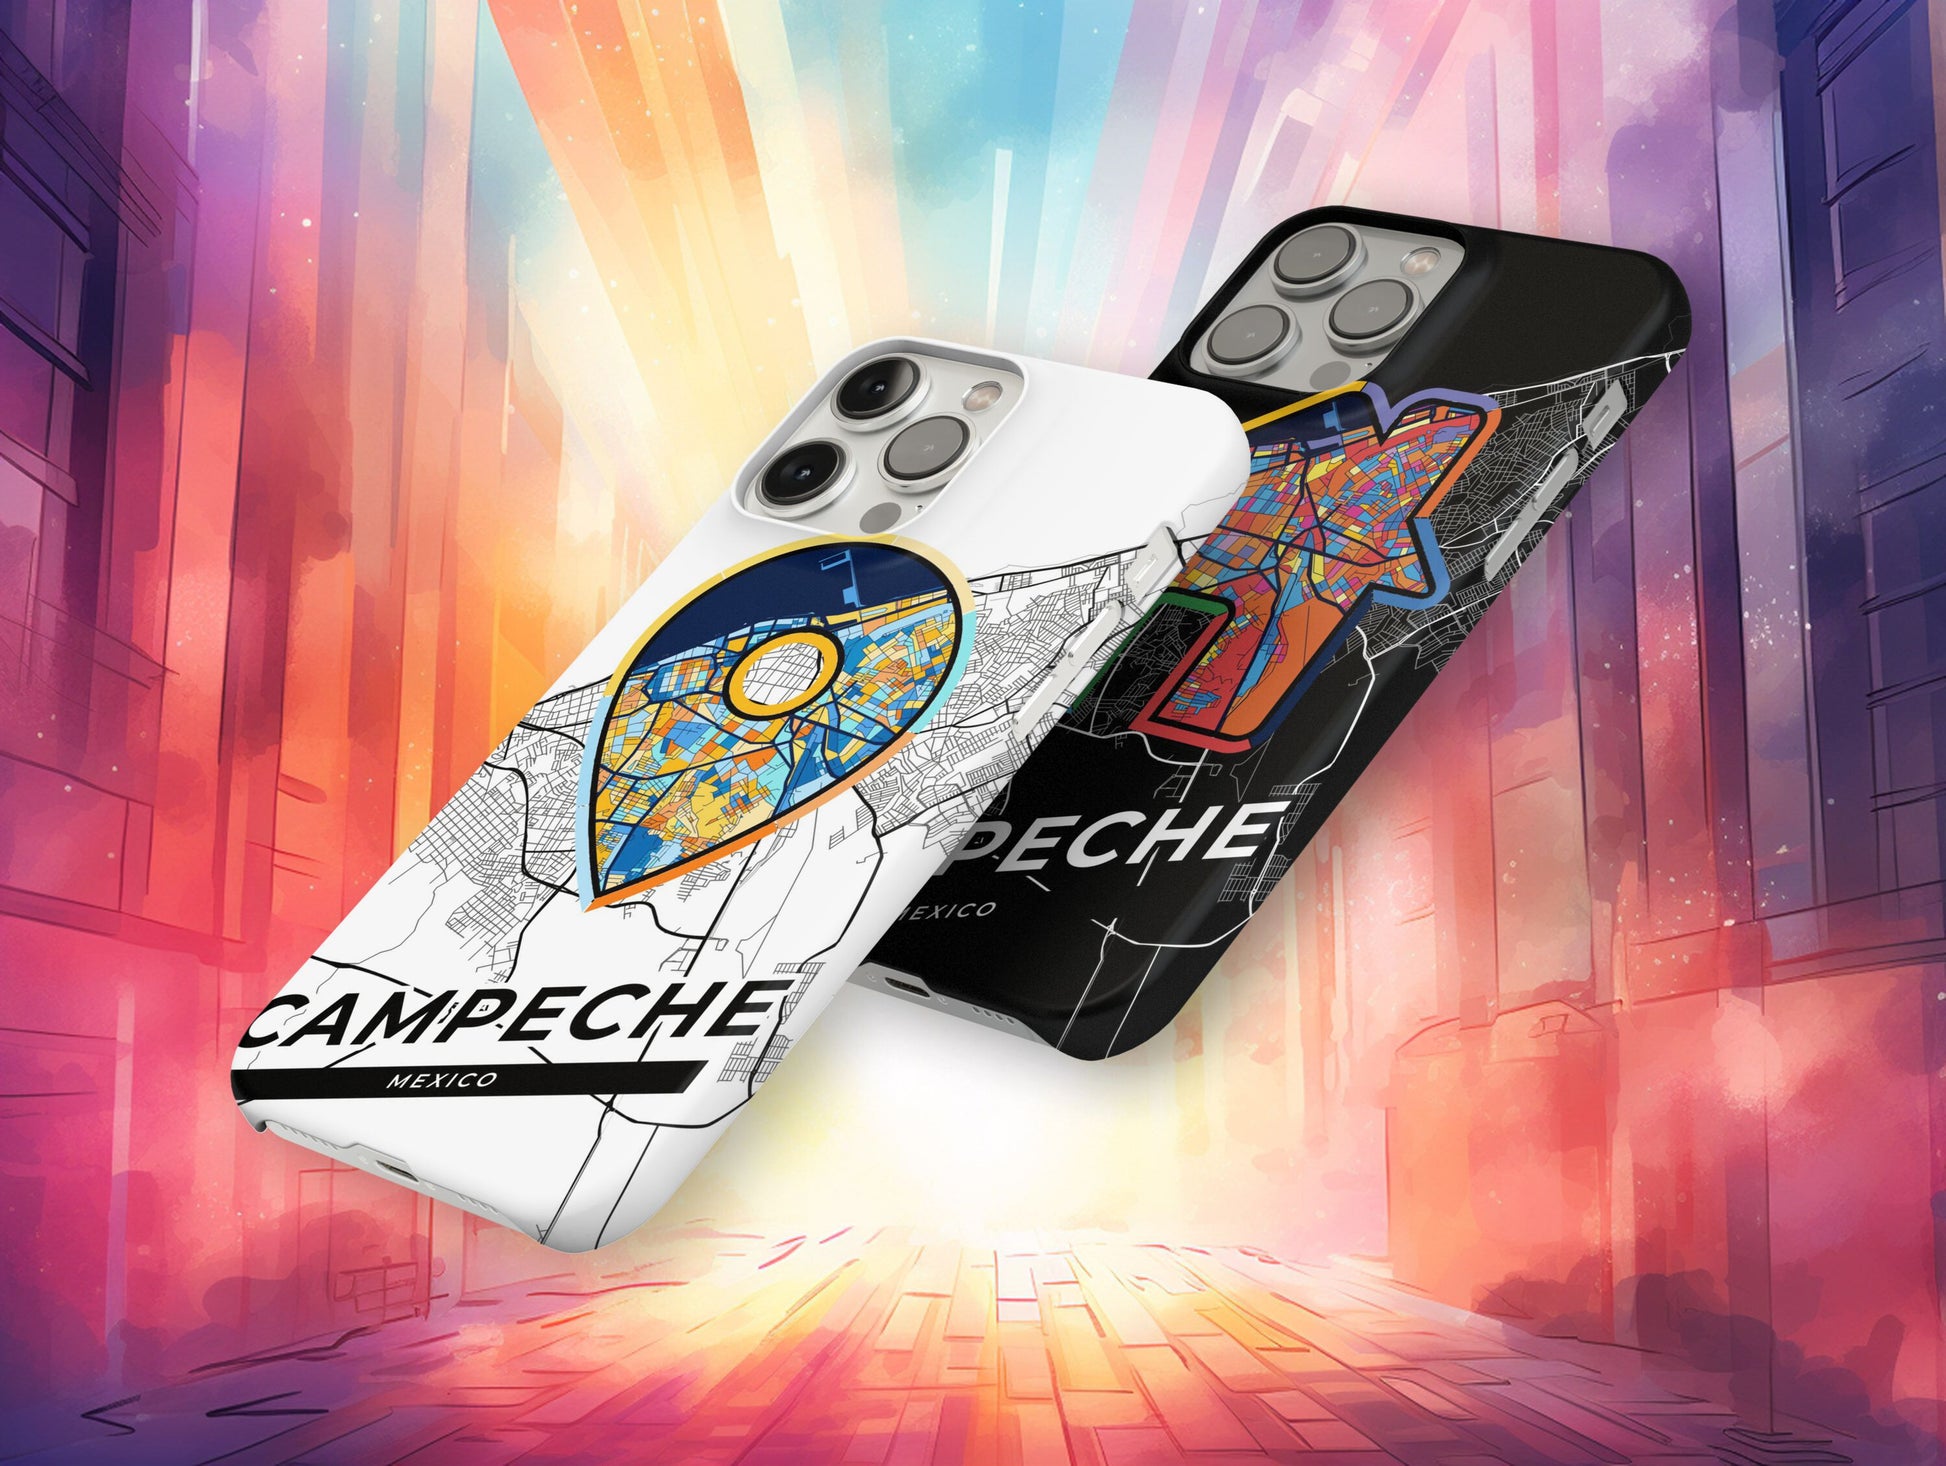 Campeche Mexico slim phone case with colorful icon. Birthday, wedding or housewarming gift. Couple match cases.